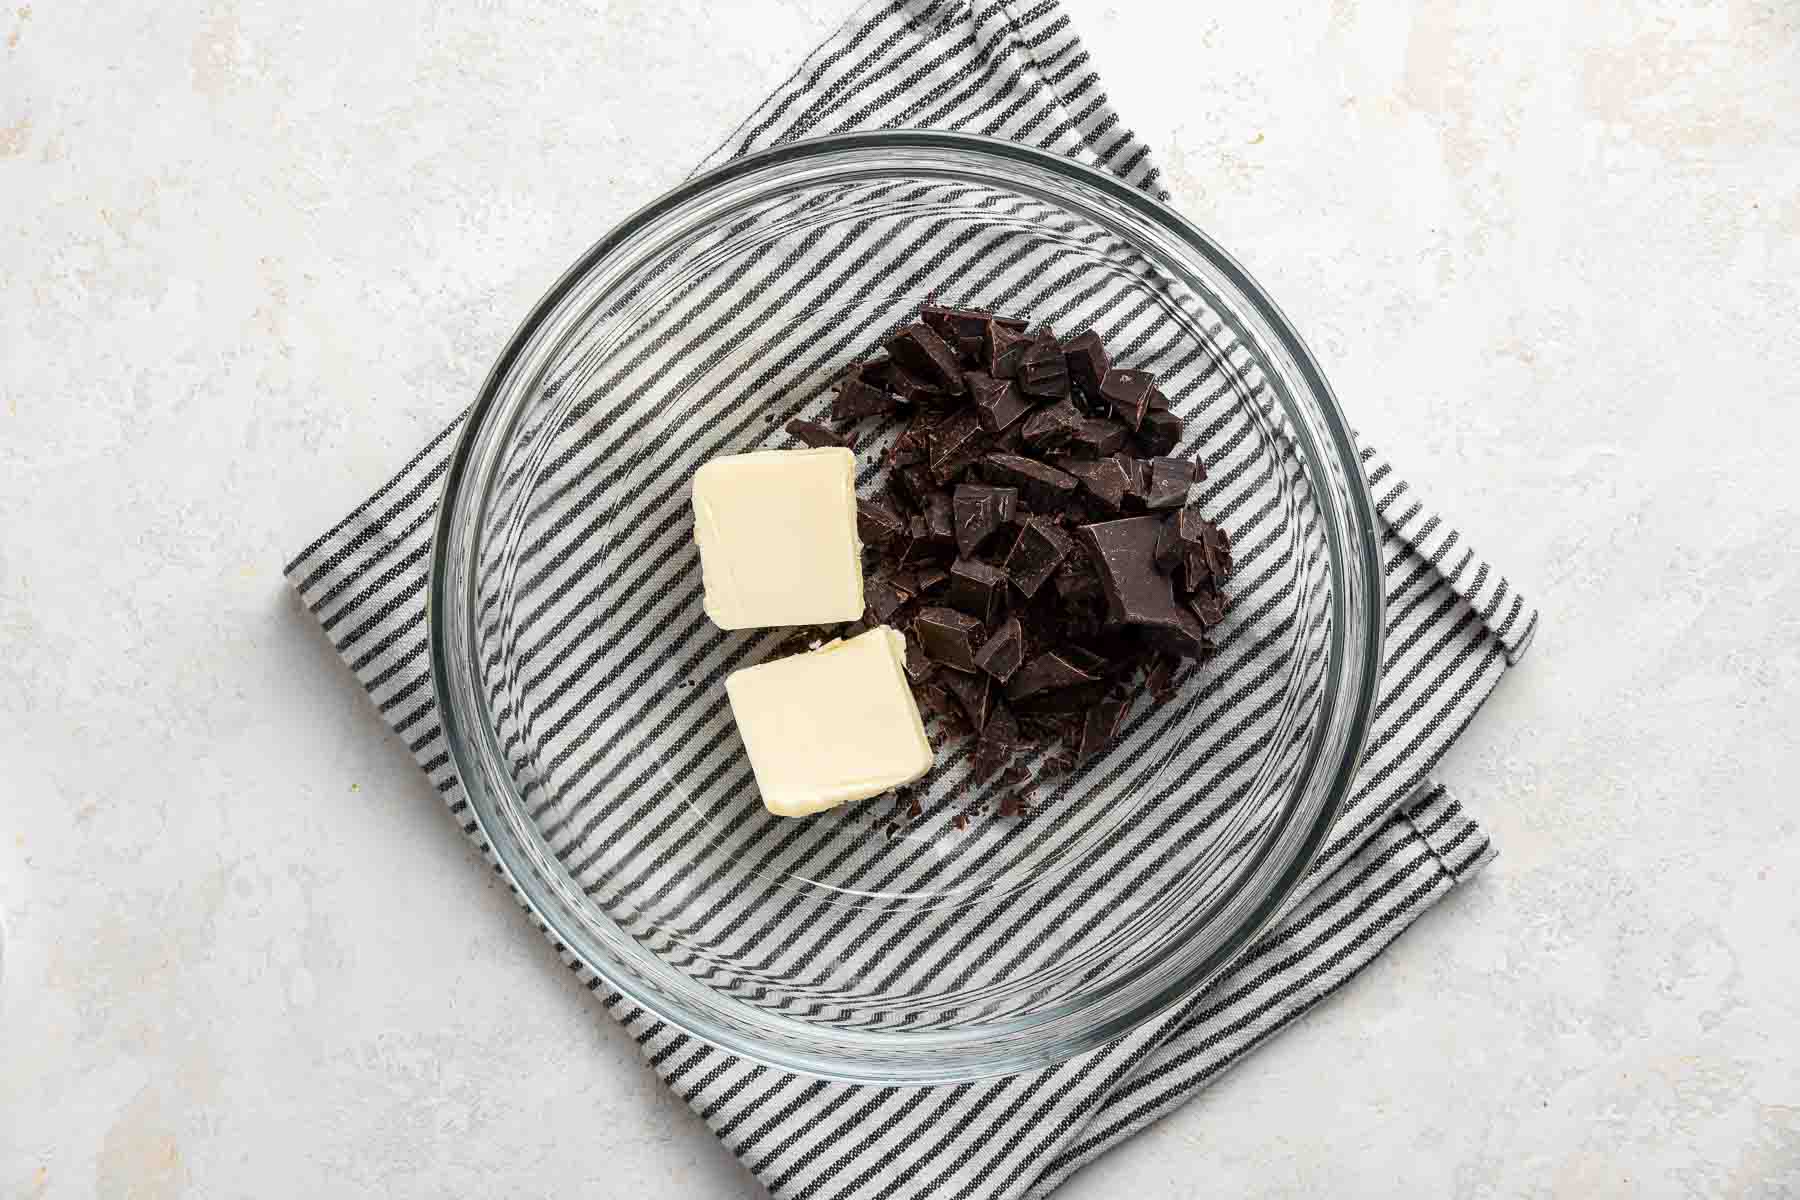 Chopped semisweet chocolate and butter in a clear glass bowl.